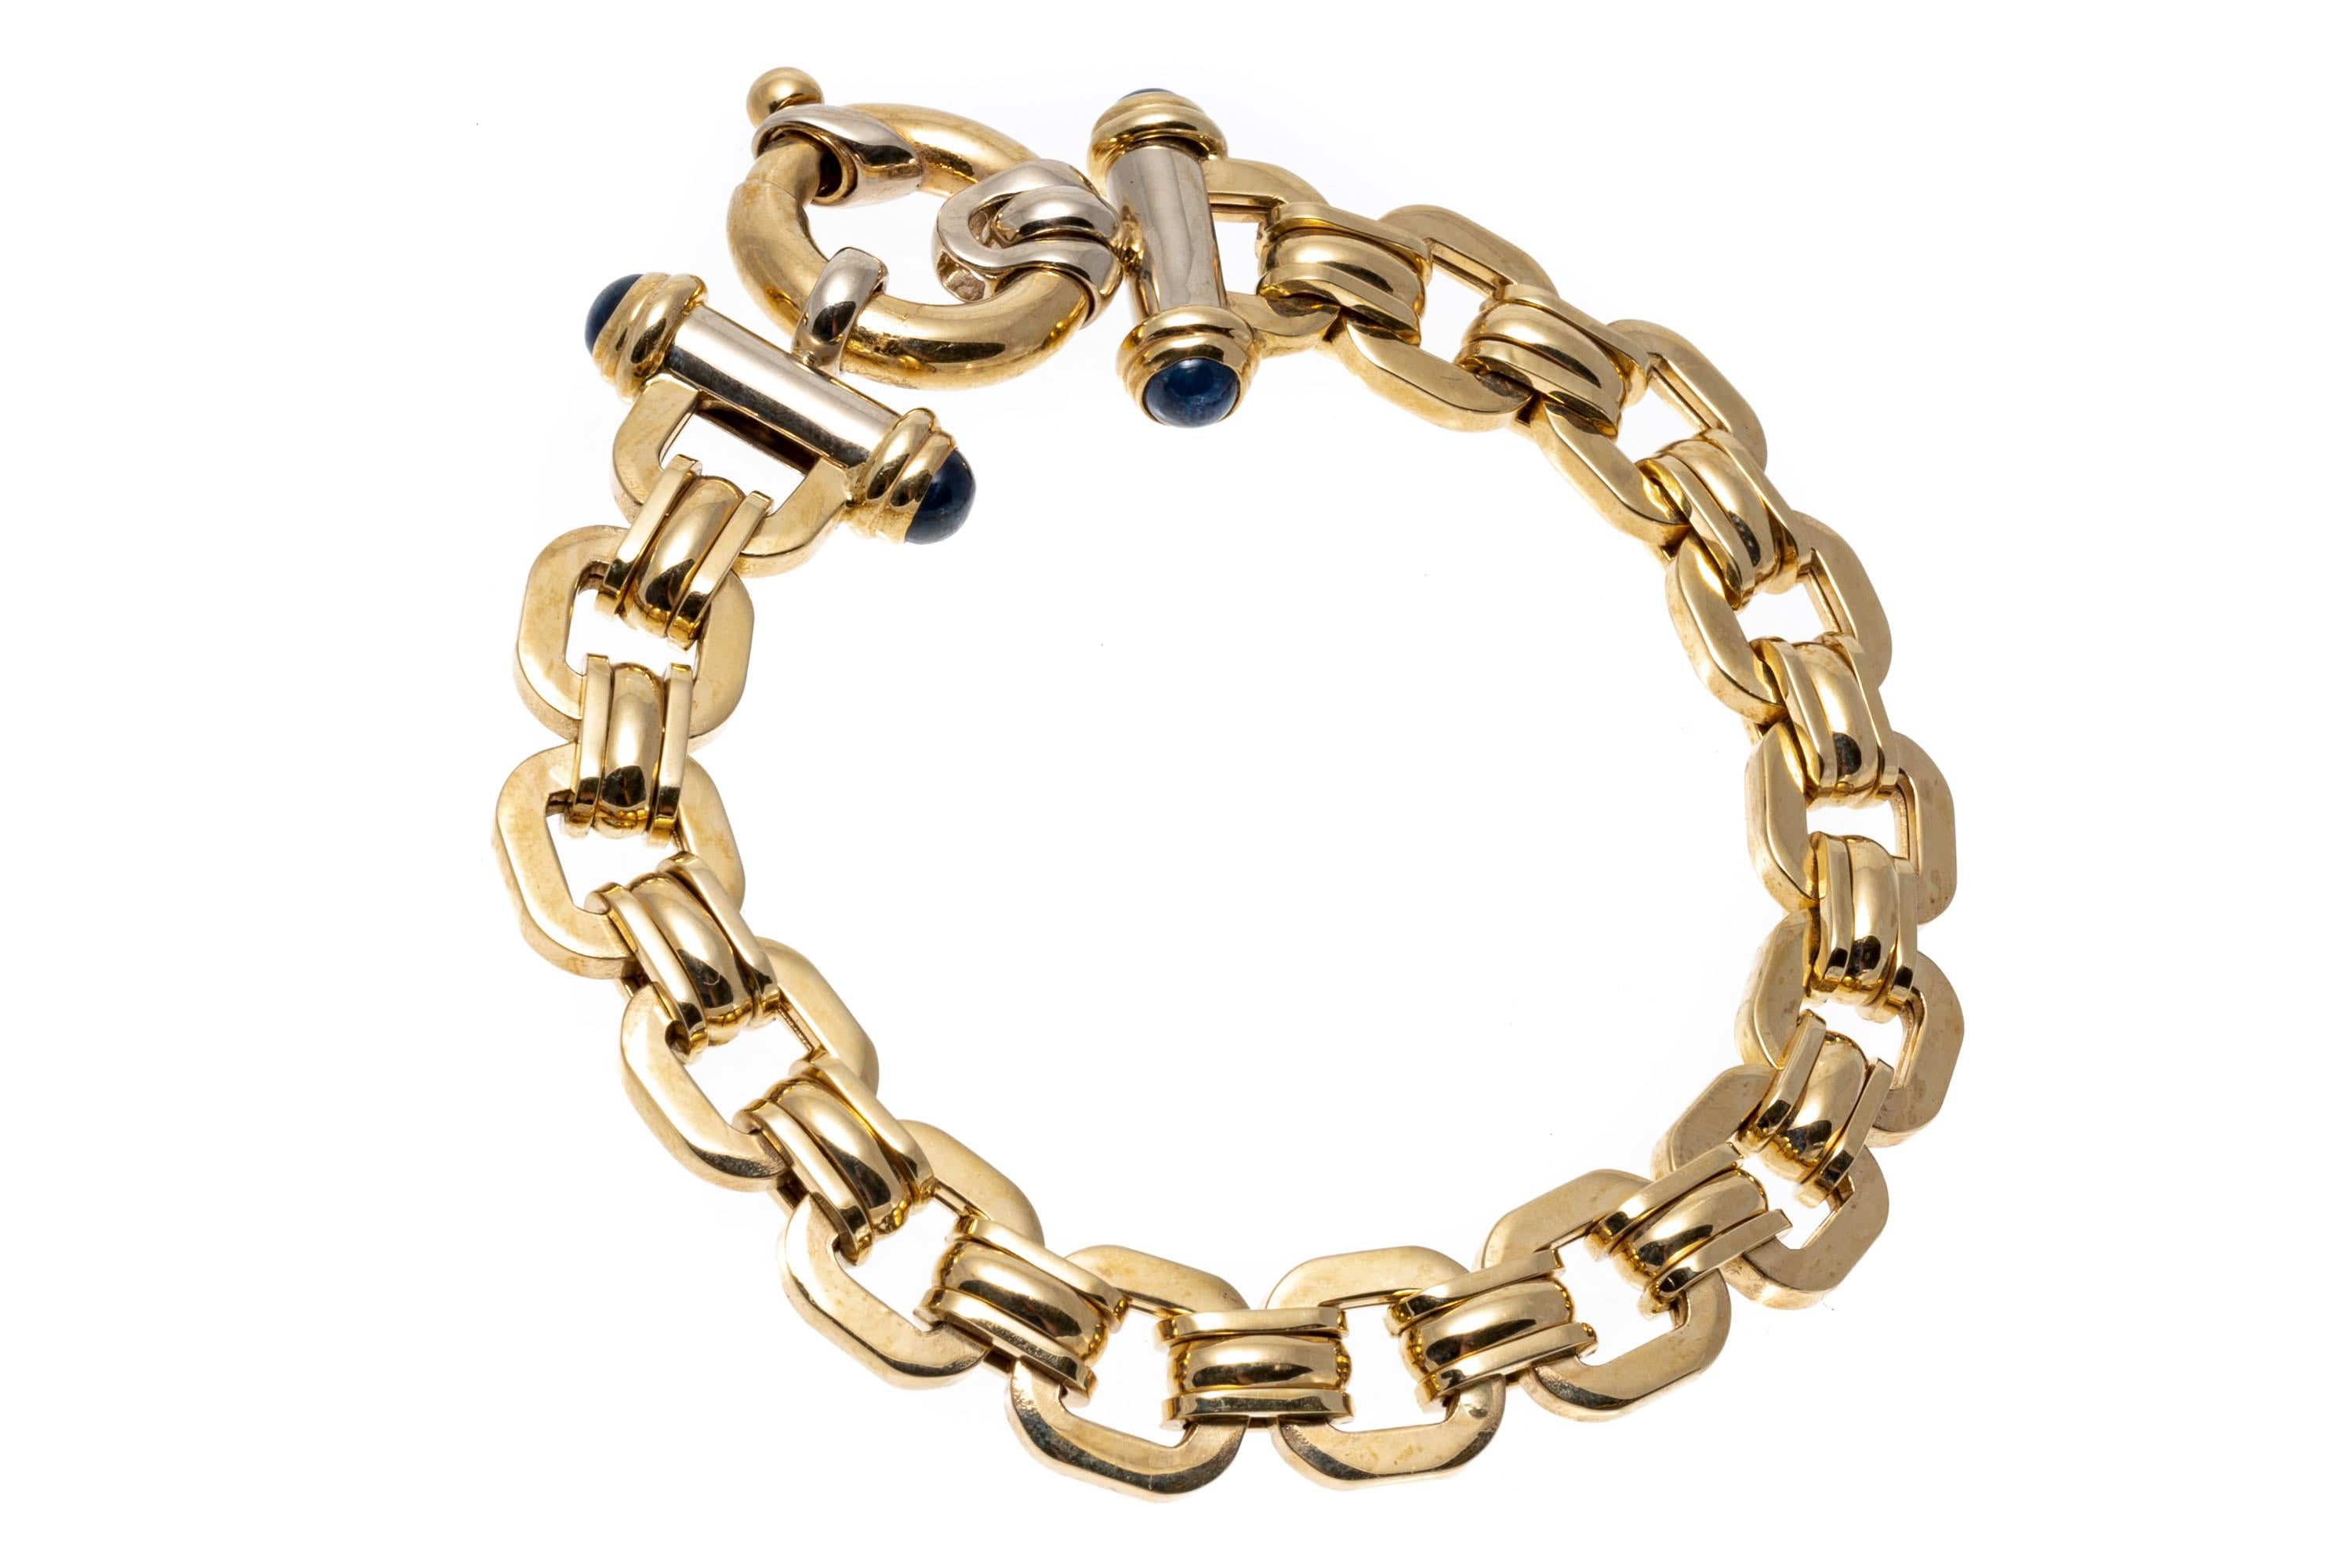 An Italian design with a contemporary feel, this 14K yellow gold bracelet has rounded square links alternating with ribbed connecting links. Set at either end of the chain and accenting the clasp are round cabochon cut sapphires with a deep navy